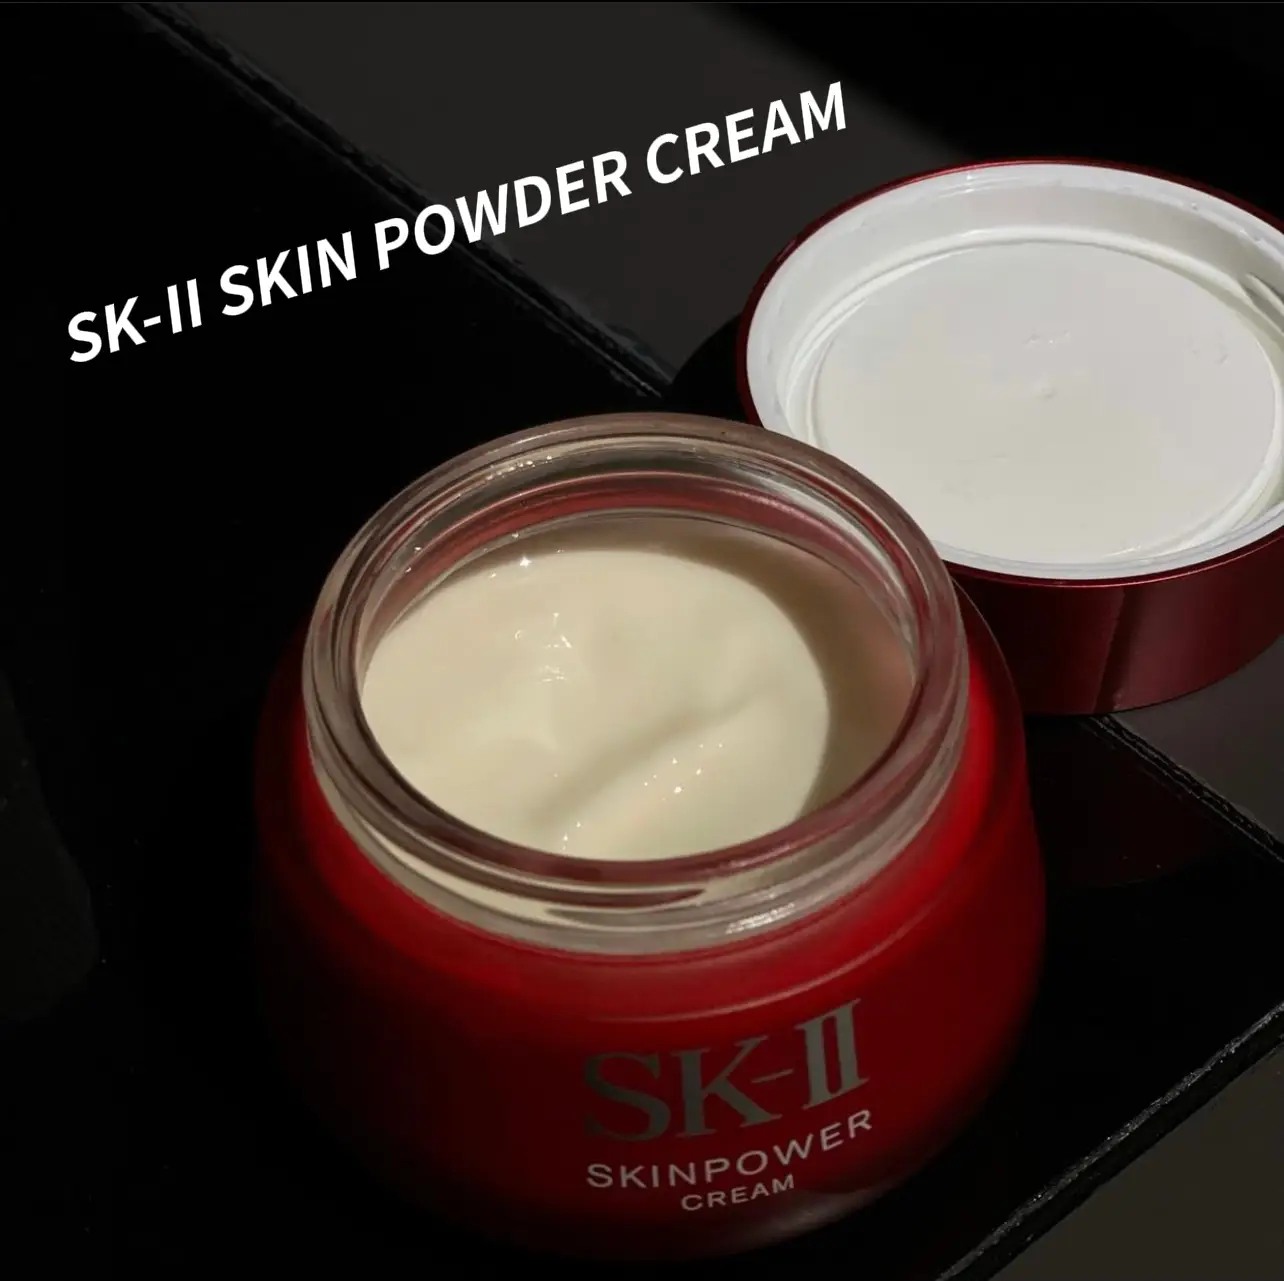 I Tried the New SK-II Cream That Promises to Plump & Brighten Dull-Looking  Skin